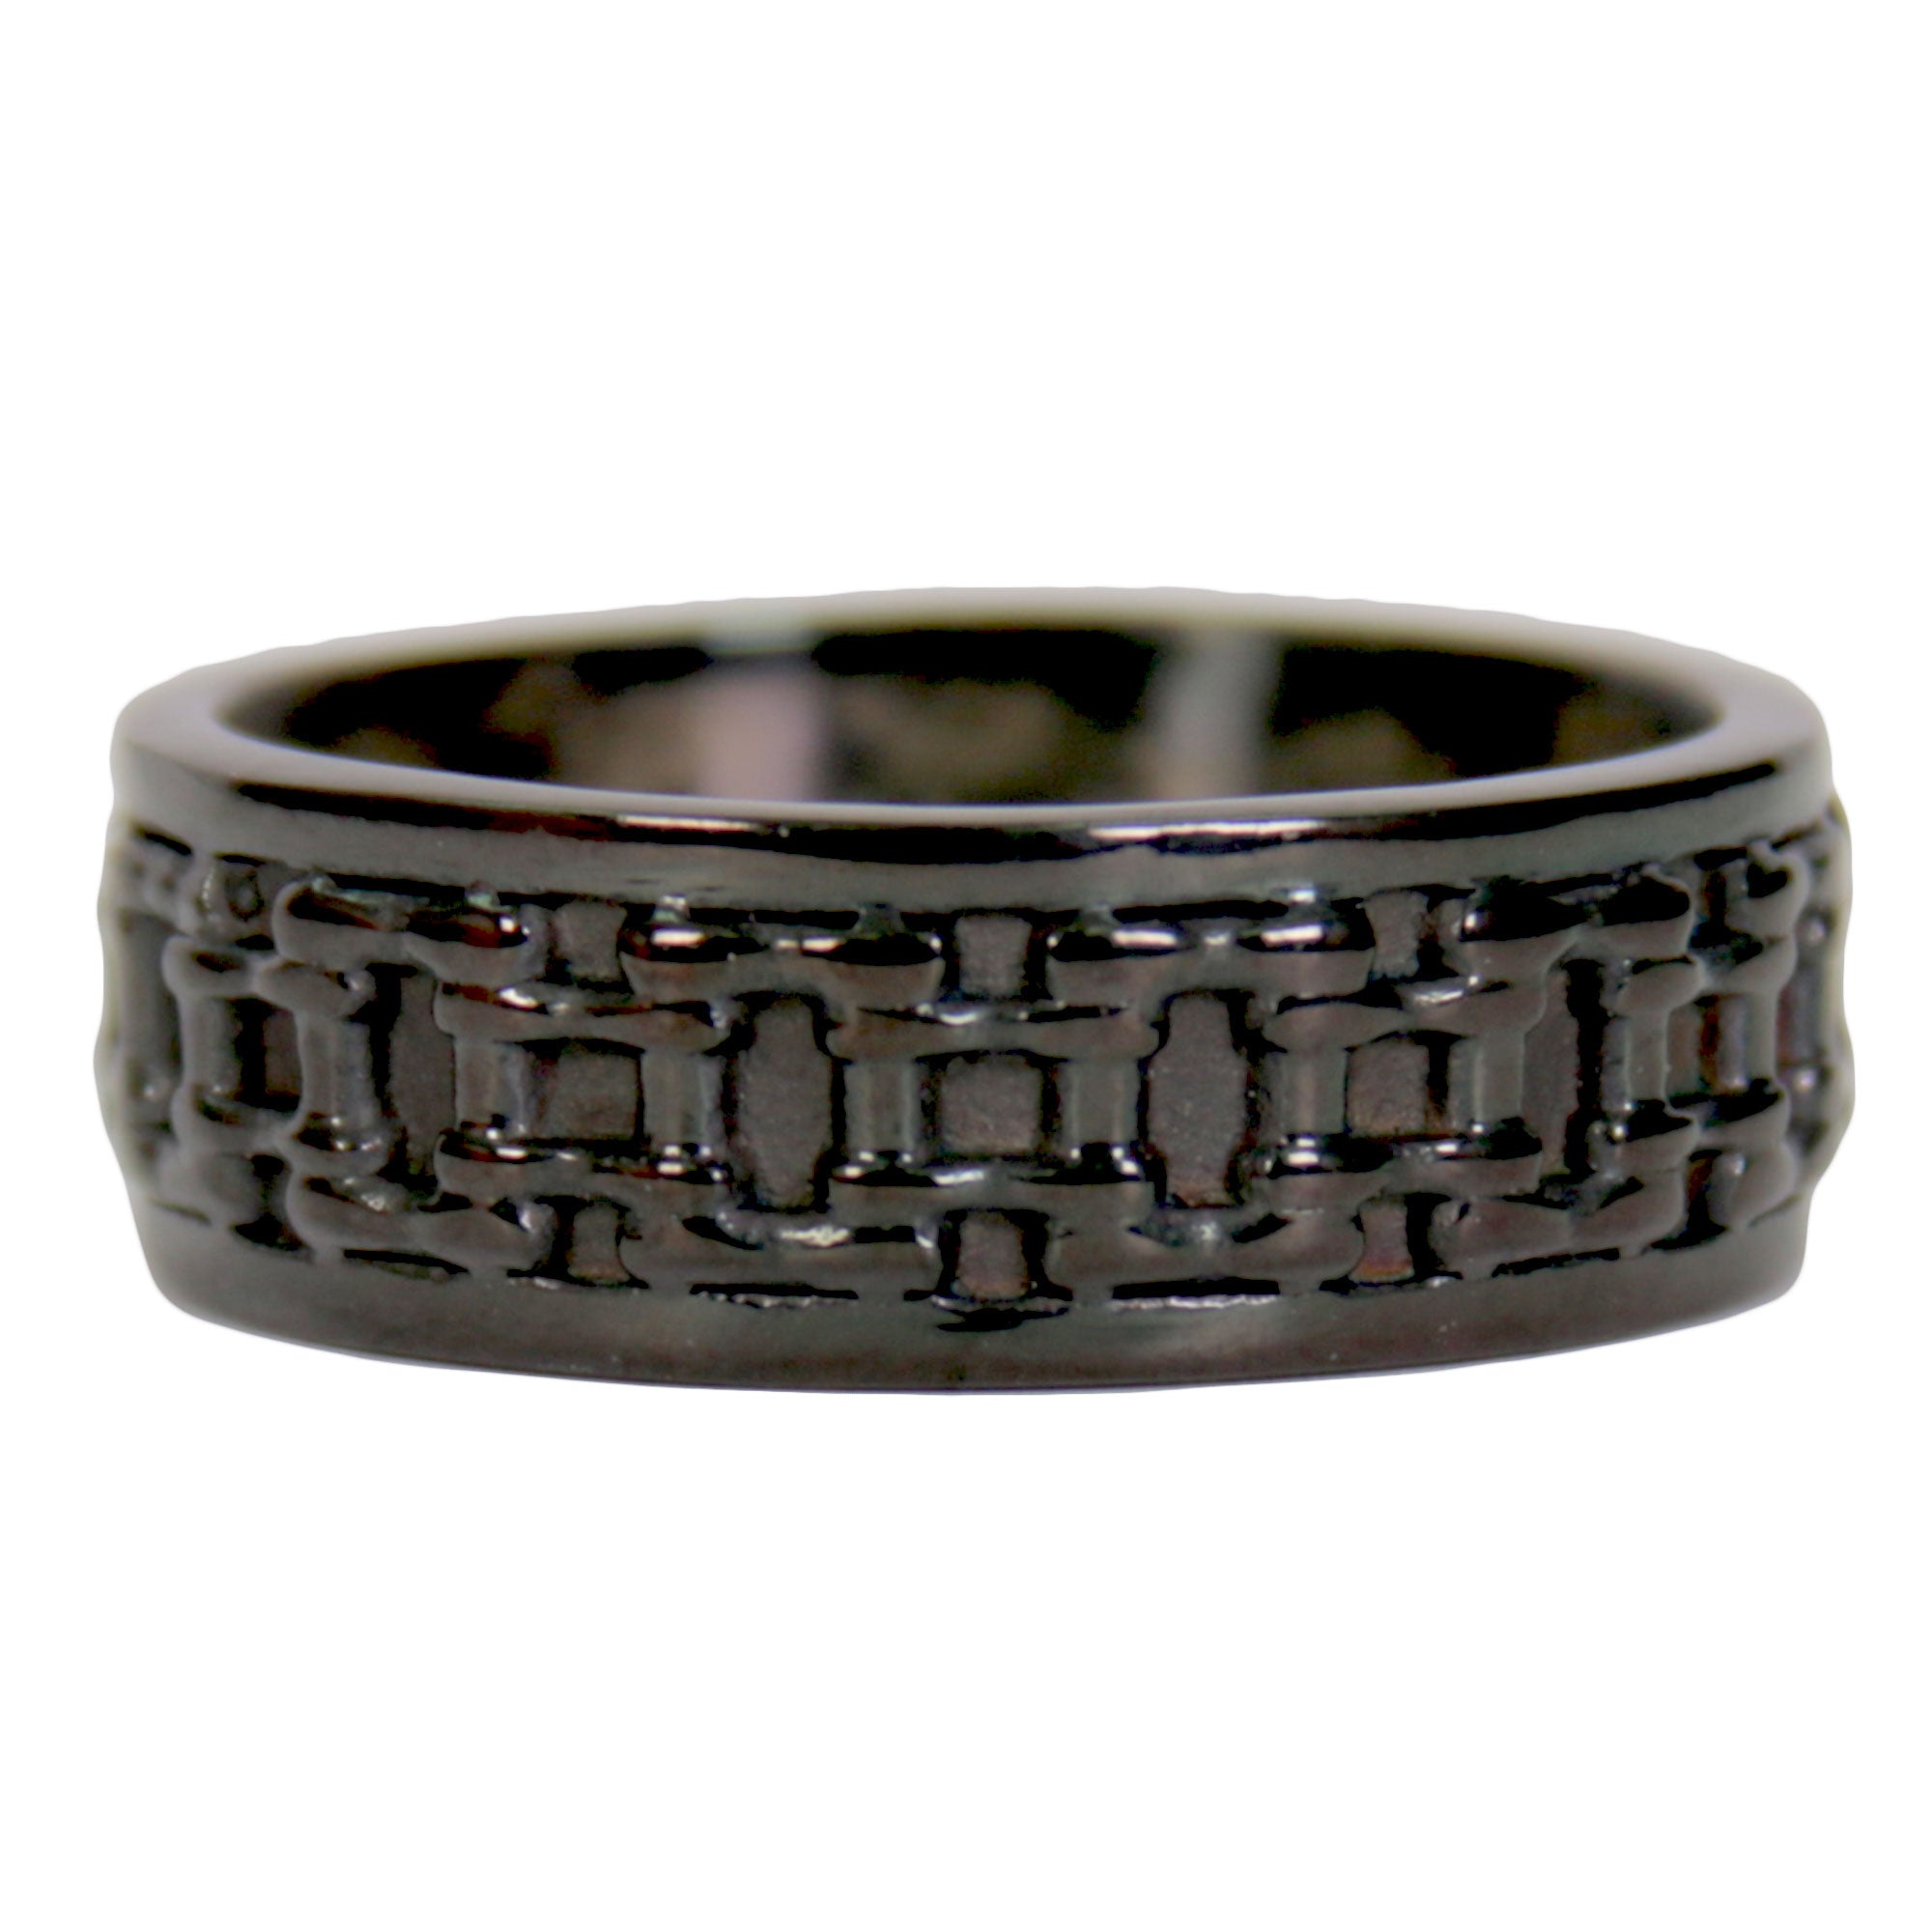 Hot Leathers JWR2139 Men's Black 'Bike Chain' Stainless Steel Ring